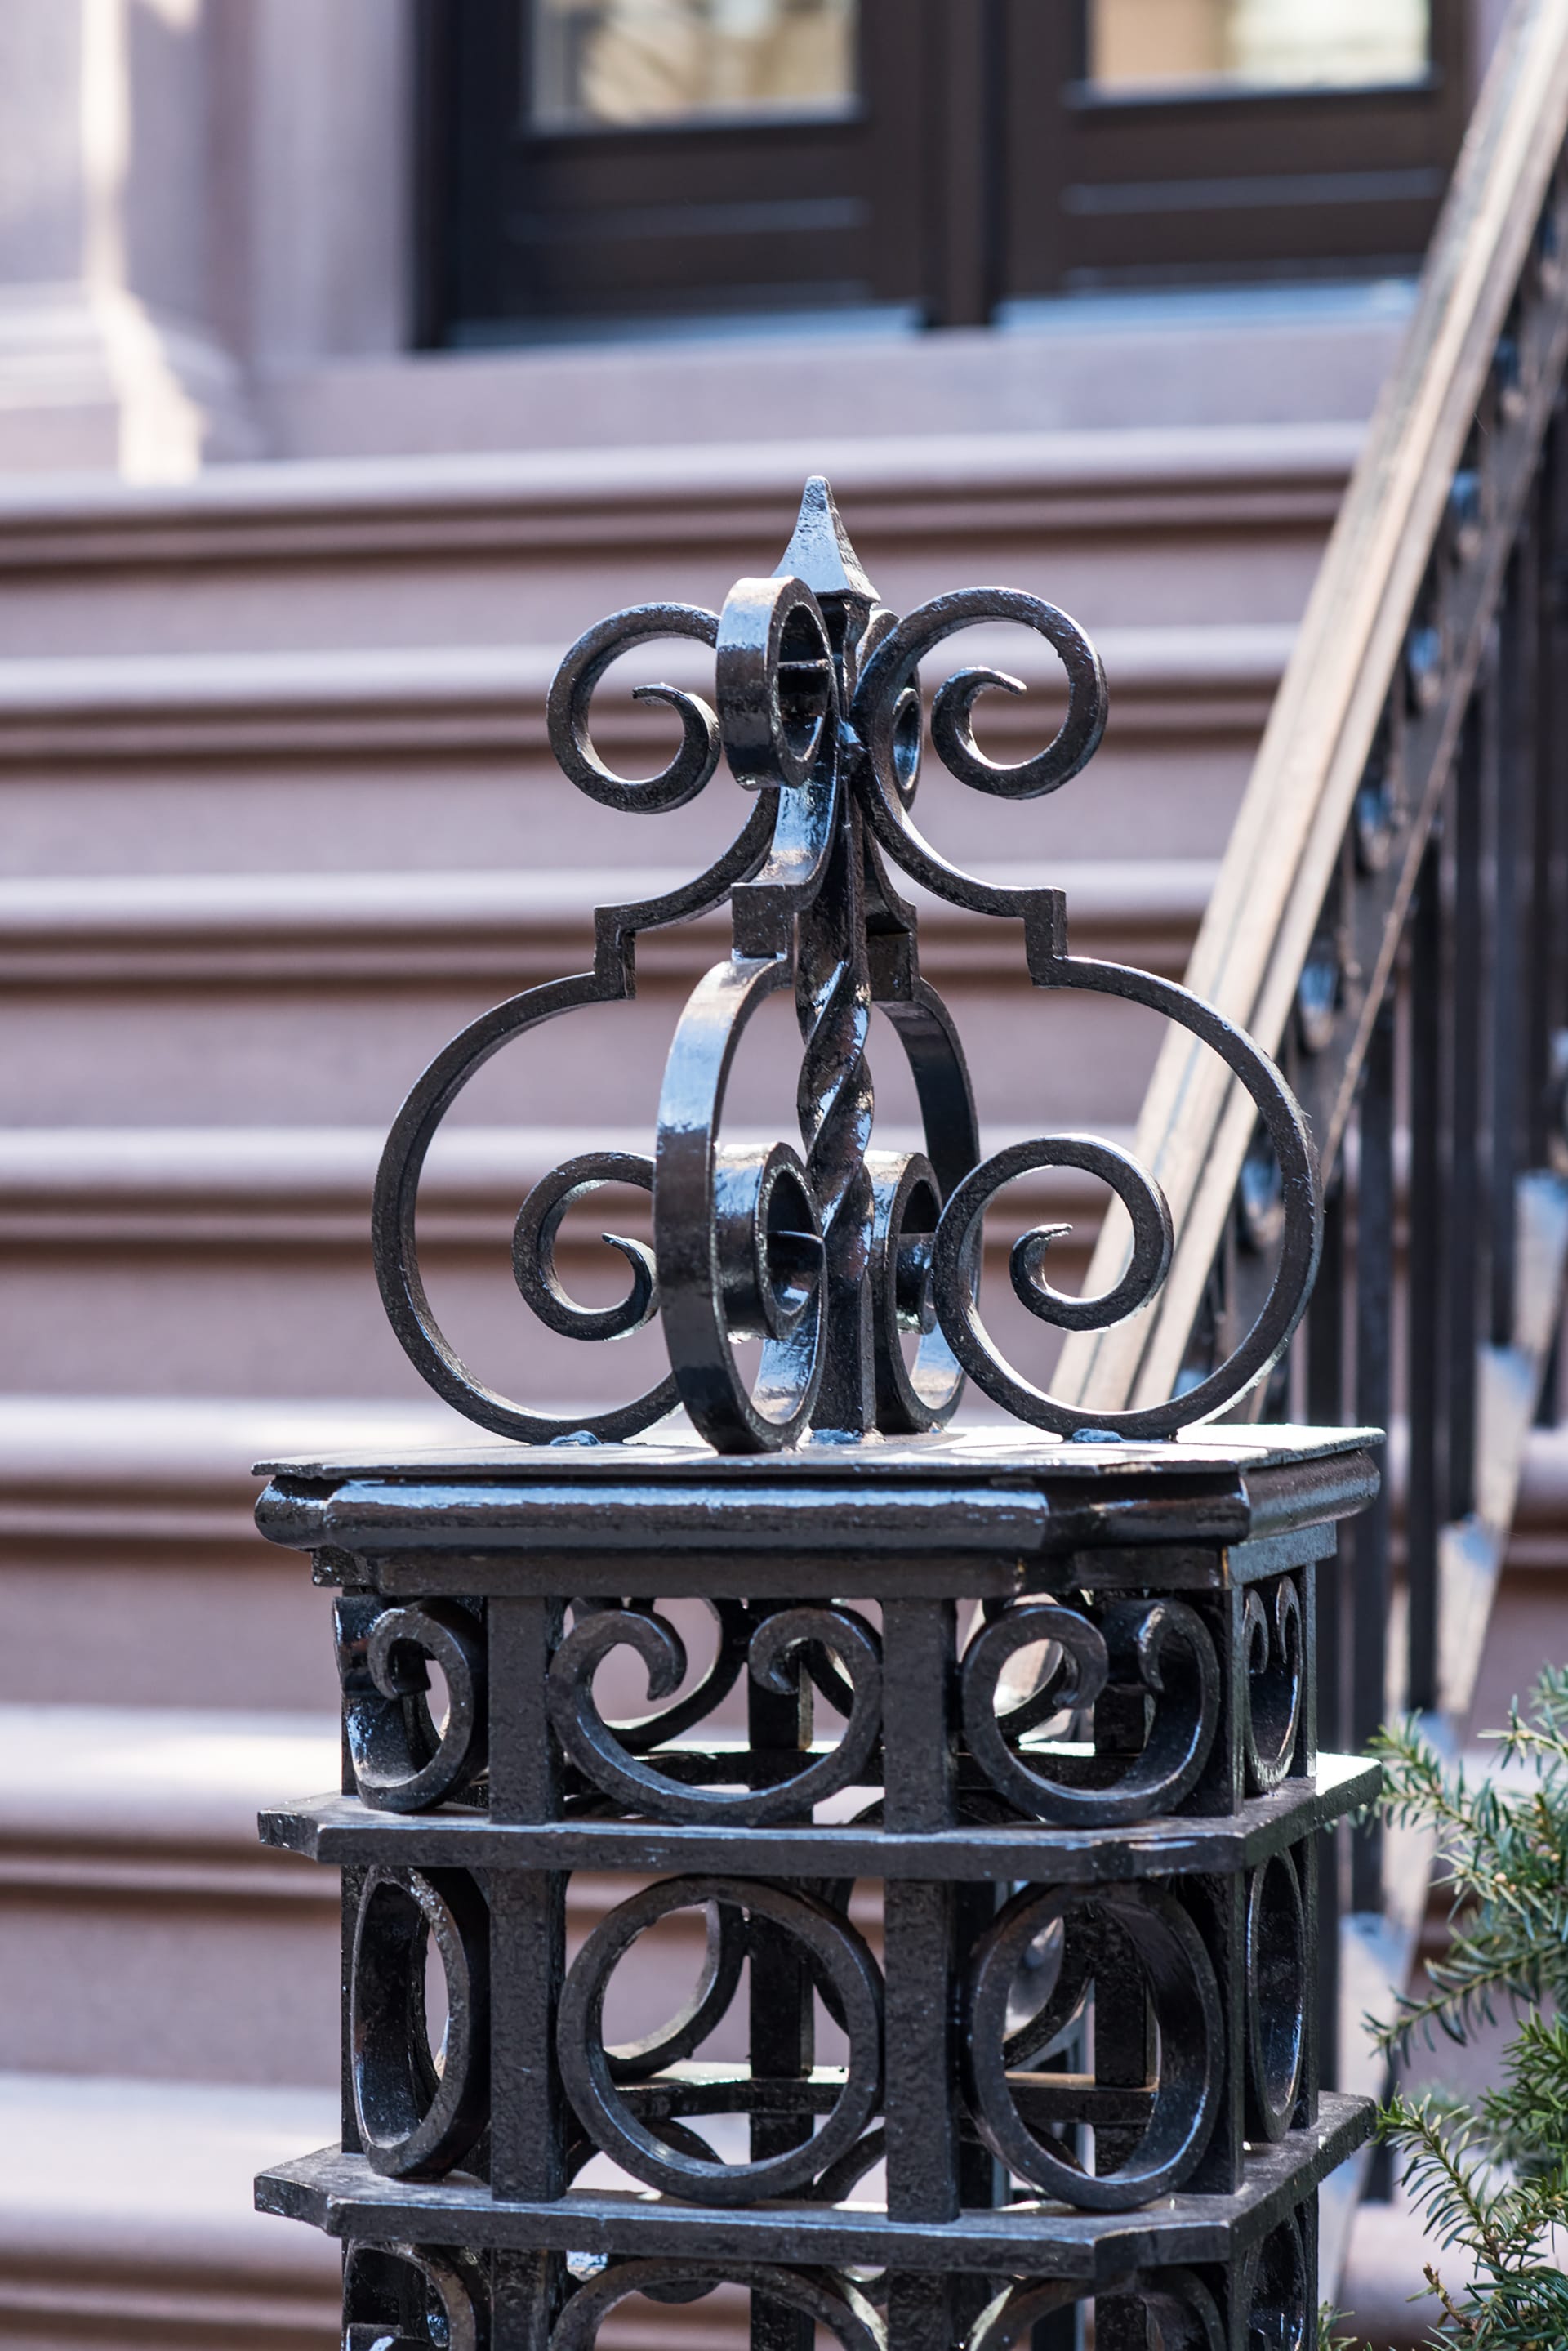 Ironwork detailing on an Upper West Side brownstone Passive House.